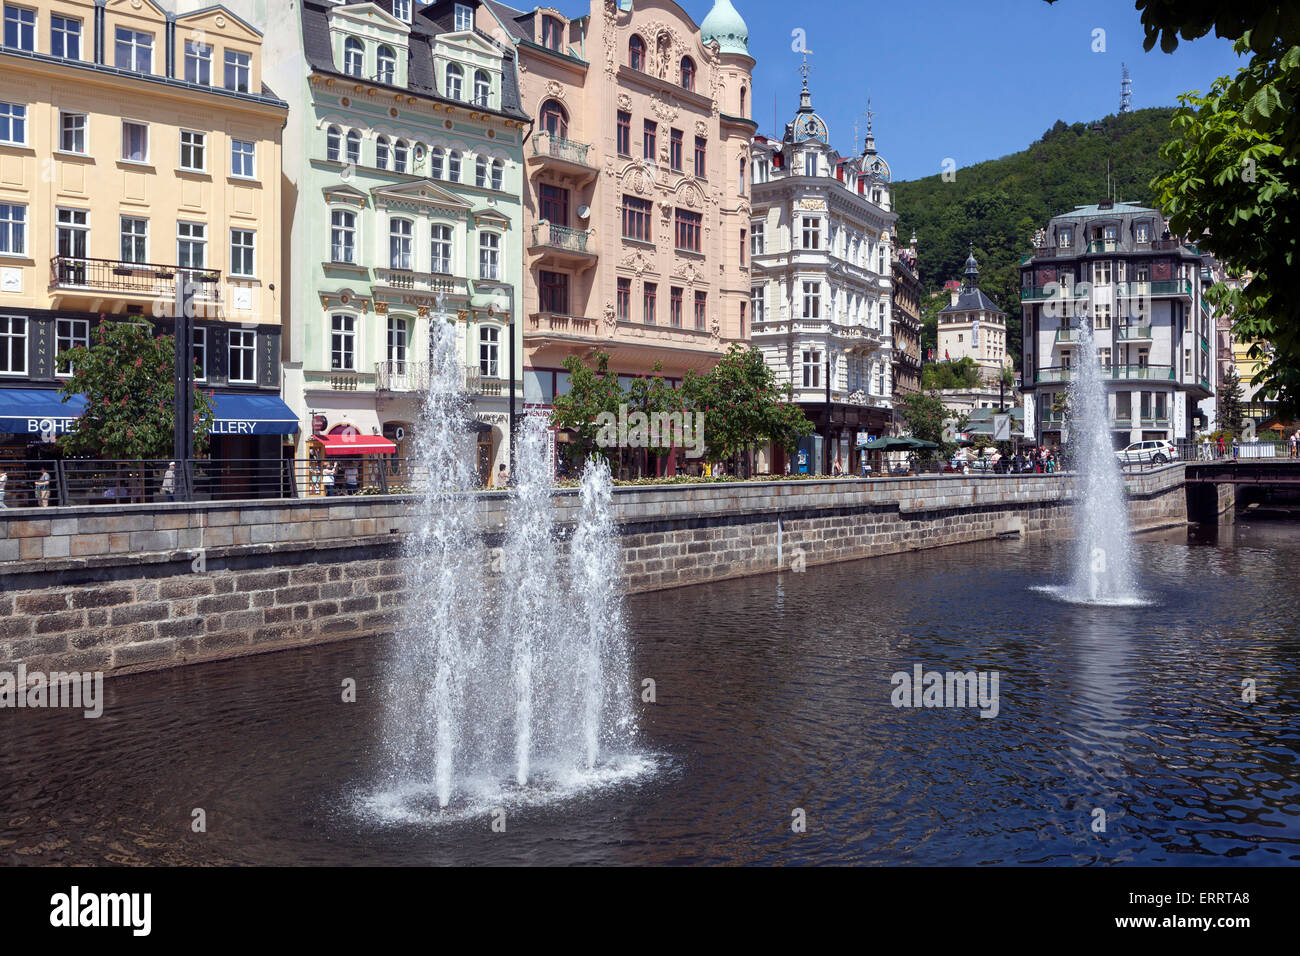 Karlovy Vary Tepla river canal fountains Houses and hotels, Karlovy Vary Czech Republic Stock Photo